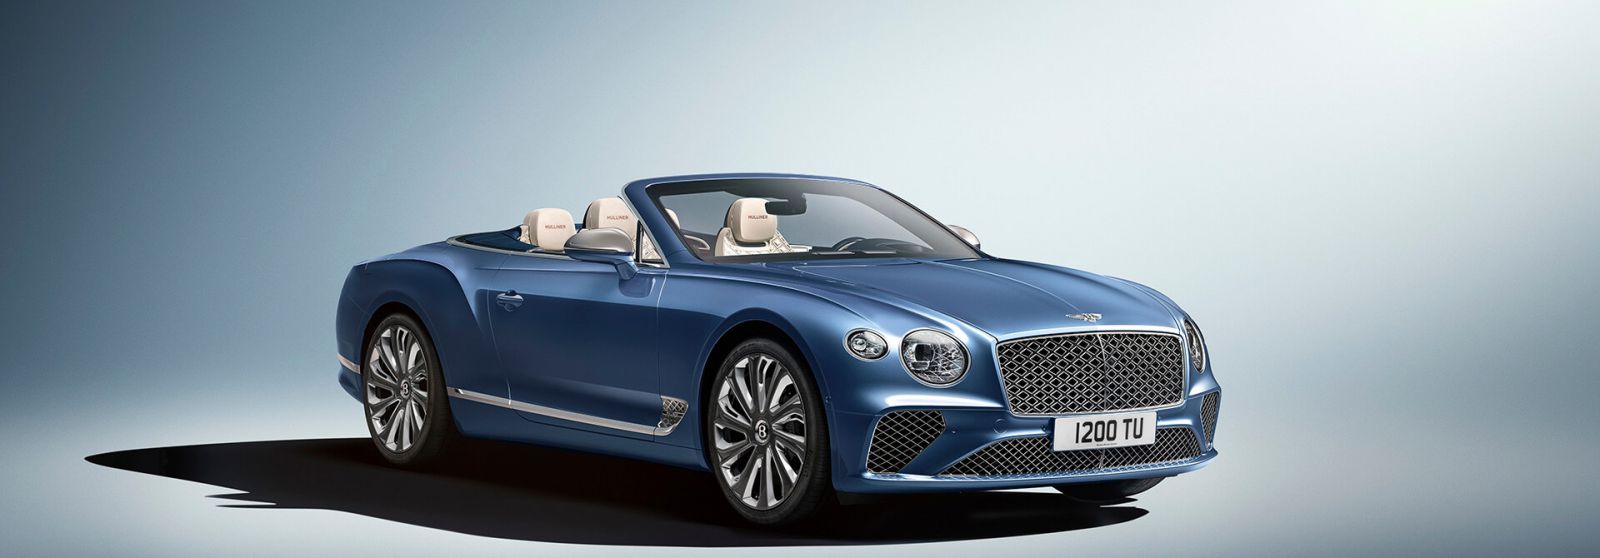 NEW CONTINENTAL GT MULLINER CONVERTIBLE: DEFINING OPEN TOP LUXURY